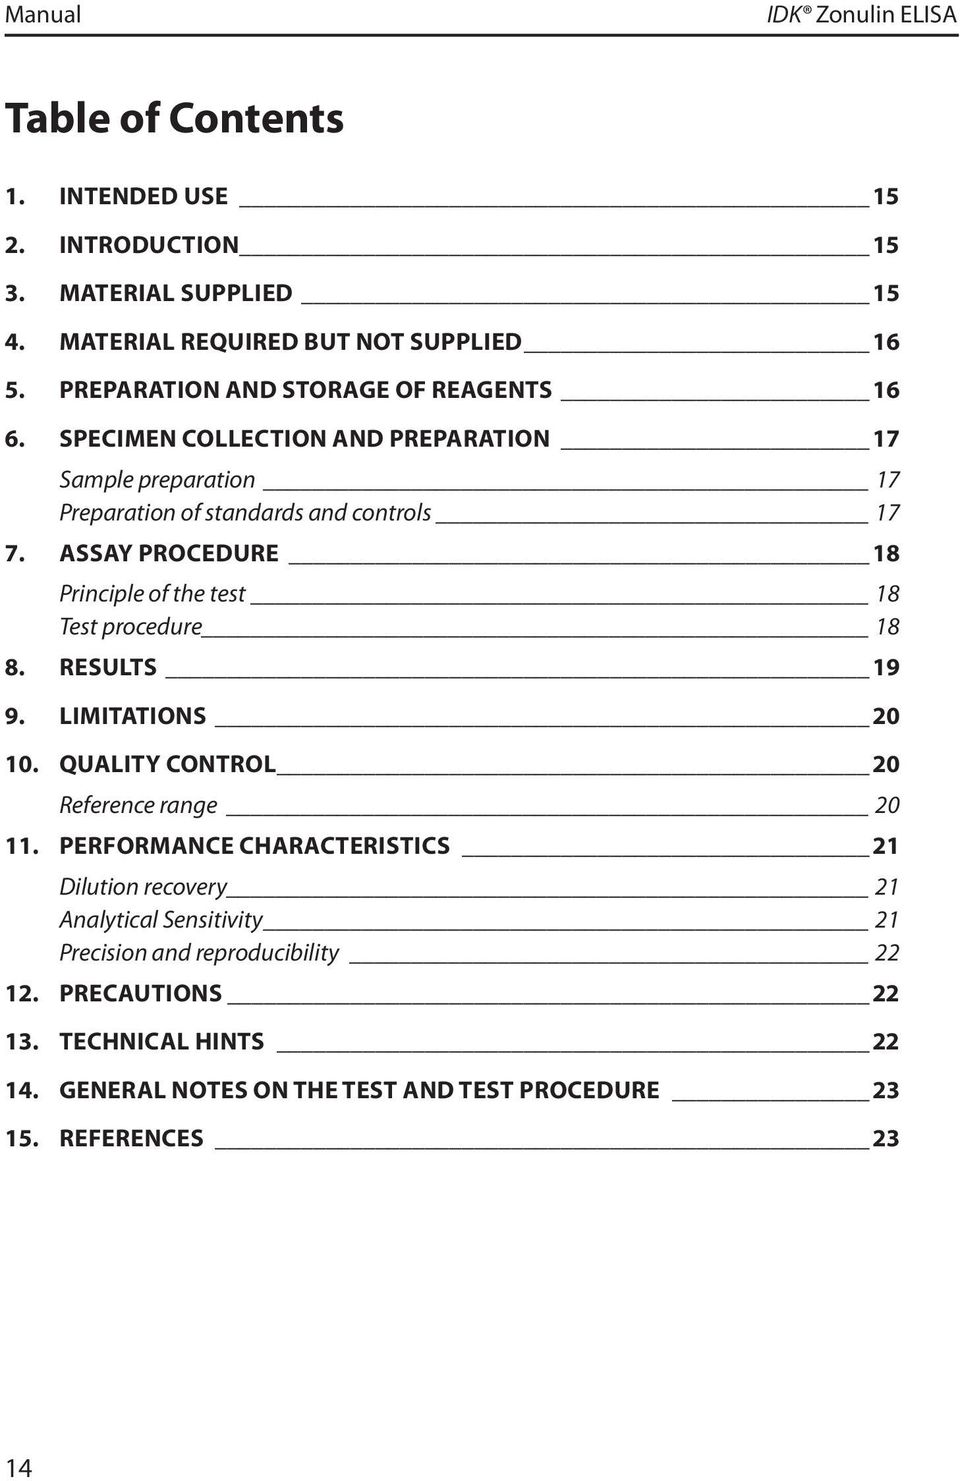 Assay procedure 18 Principle of the test 18 Test procedure 18 8. Results 19 9. Limitations 20 10. Quality control 20 Reference range 20 11.